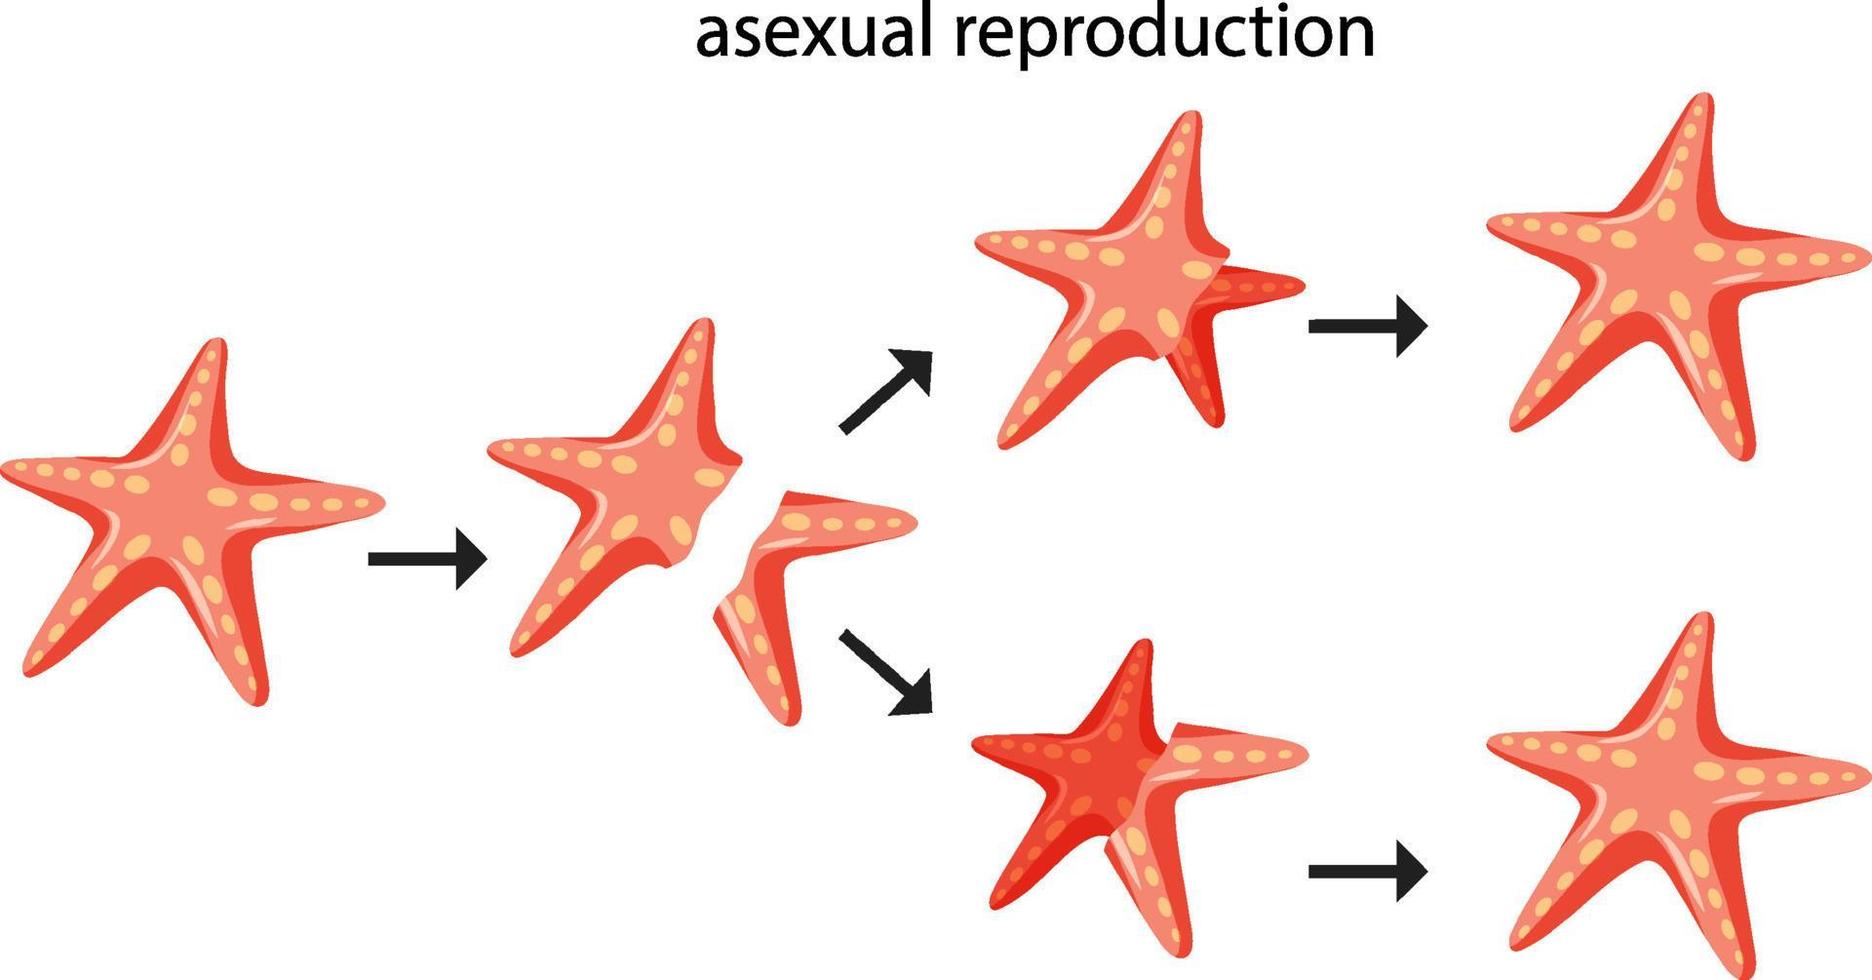 Asexual reproduction fragmentation with starfish vector